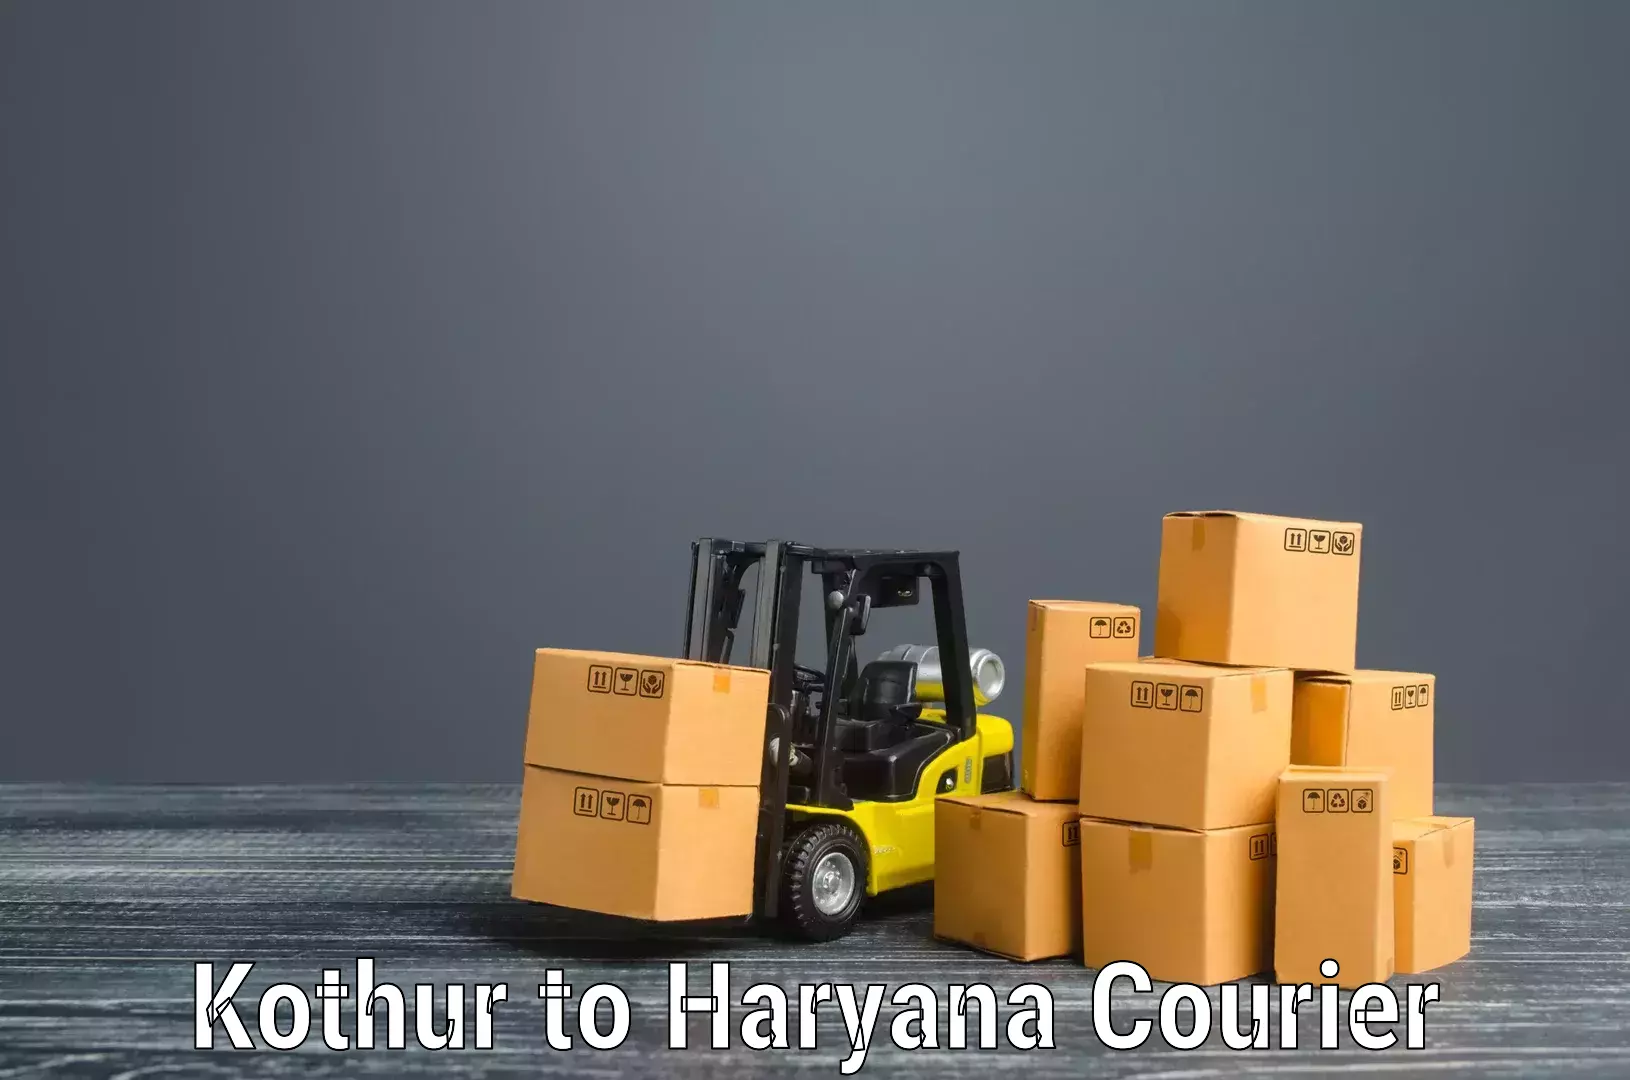 Quality relocation assistance in Kothur to Karnal